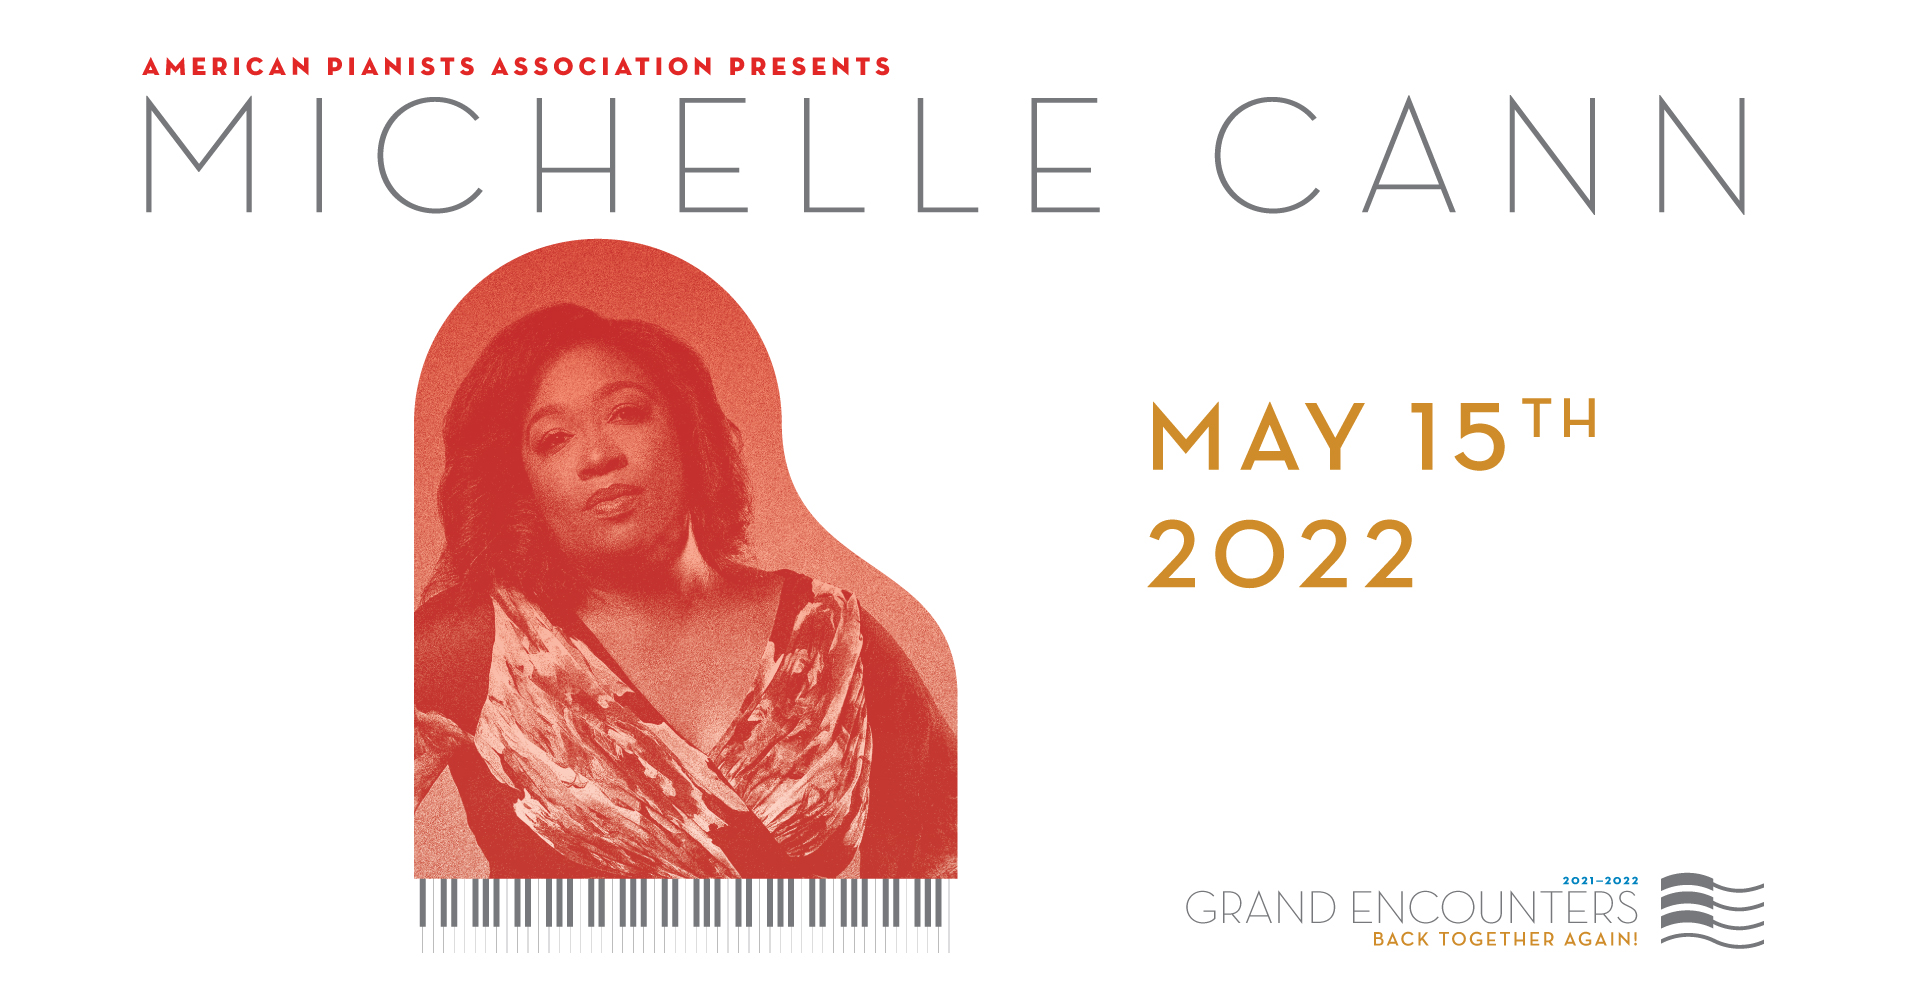 Promotional Image for Michelle Cann concert on May 15